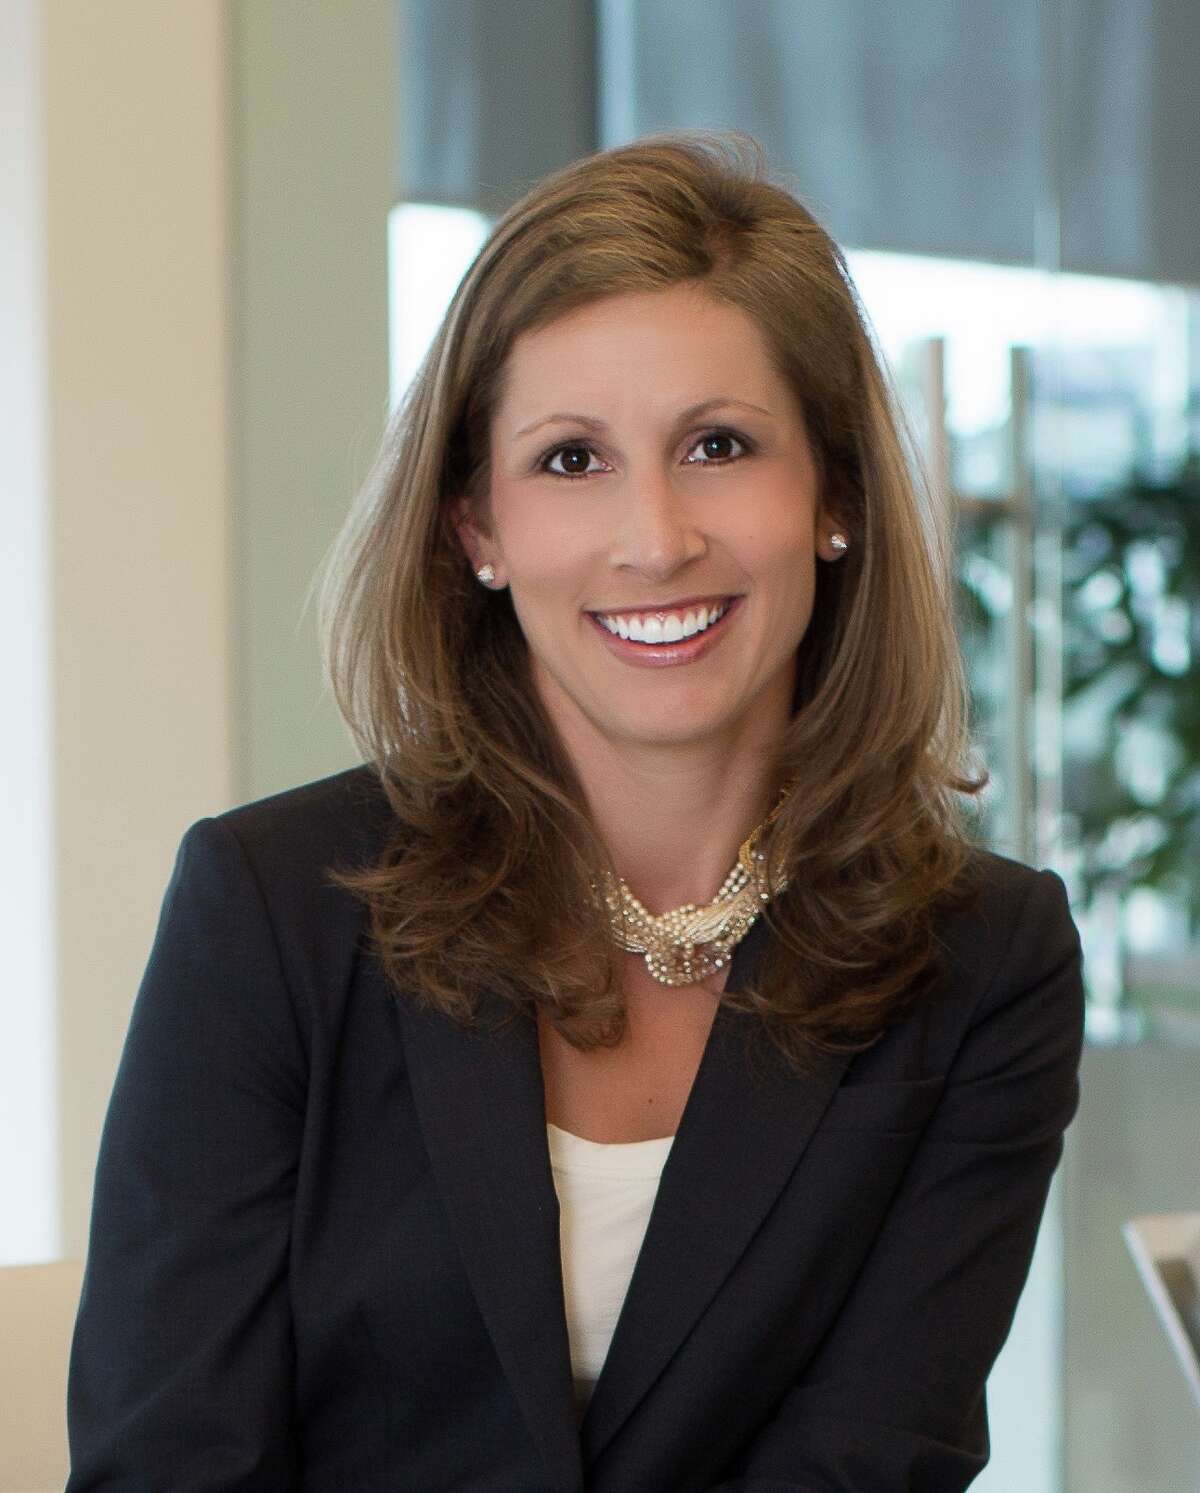 Marilyn Guion has joined CBRE as a senior vice president on its advisory &transaction services, investor leasing team. Guion was formerly with Colvill Office Properties.